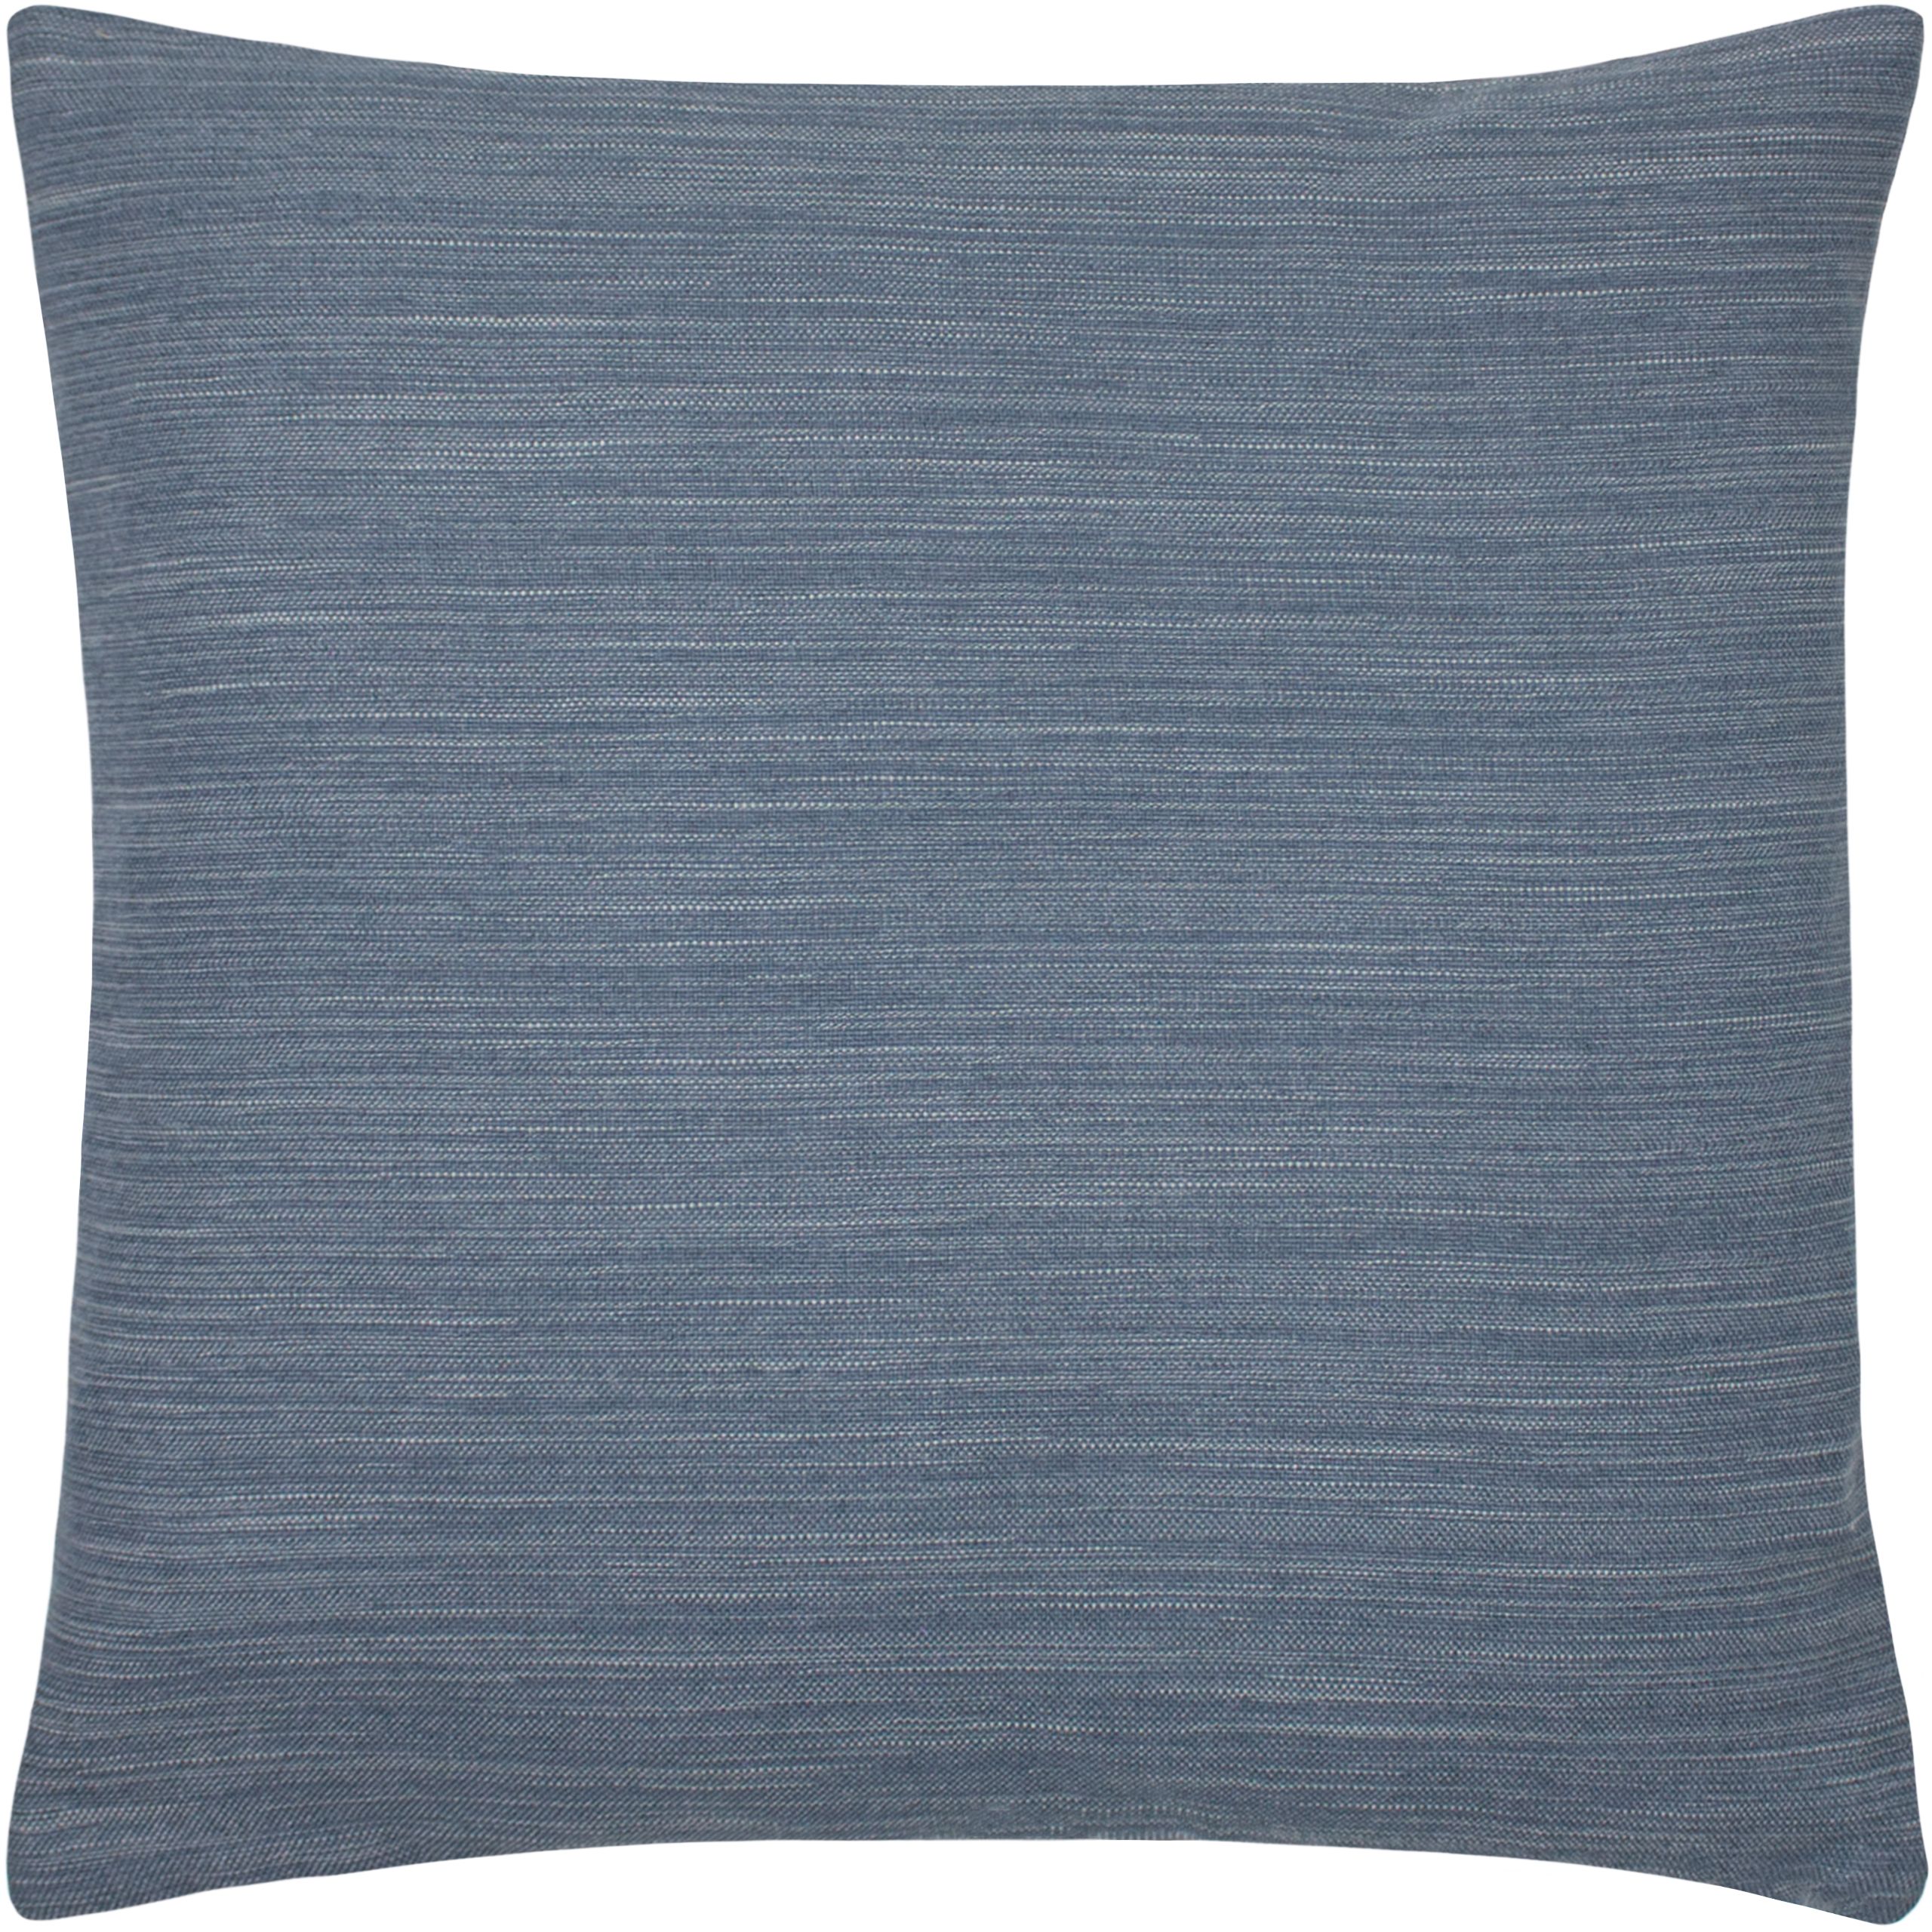 A simple yet sophisticated plain cushion that can add that finishing touch to any space. 